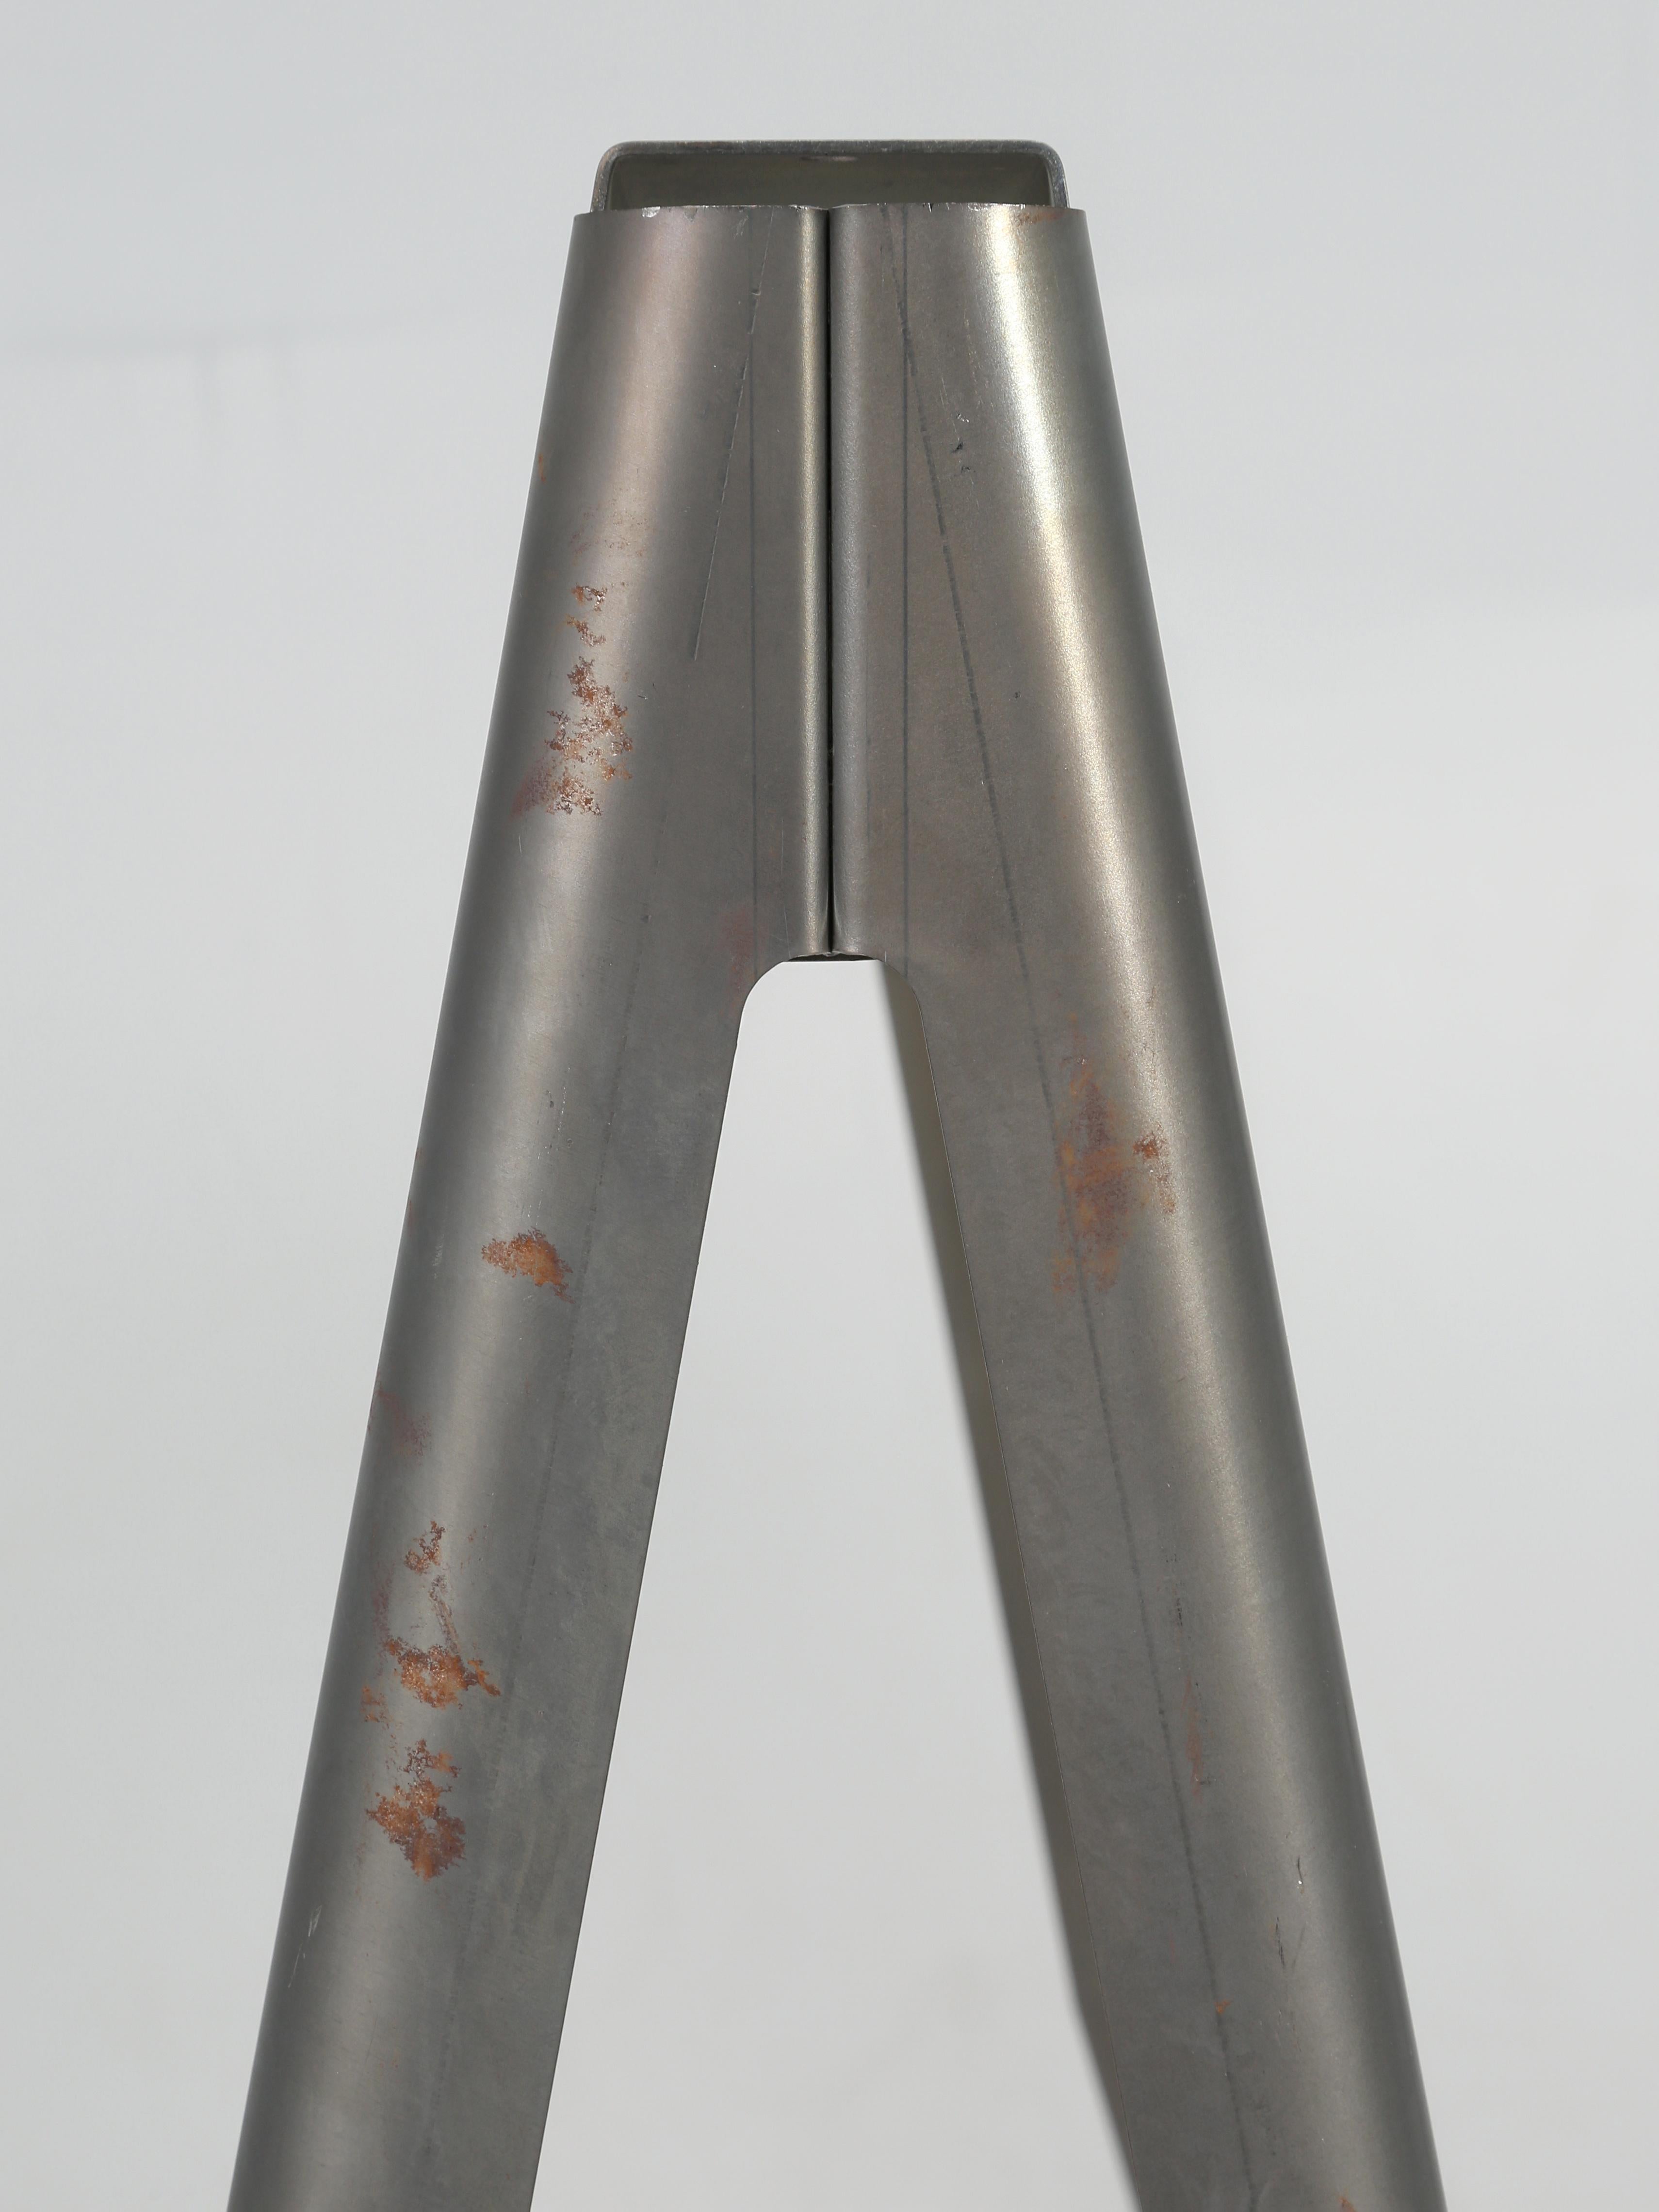 Genuine French Made Tolix Steel Trestle Table Legs, Table Top Not Included, New For Sale 1